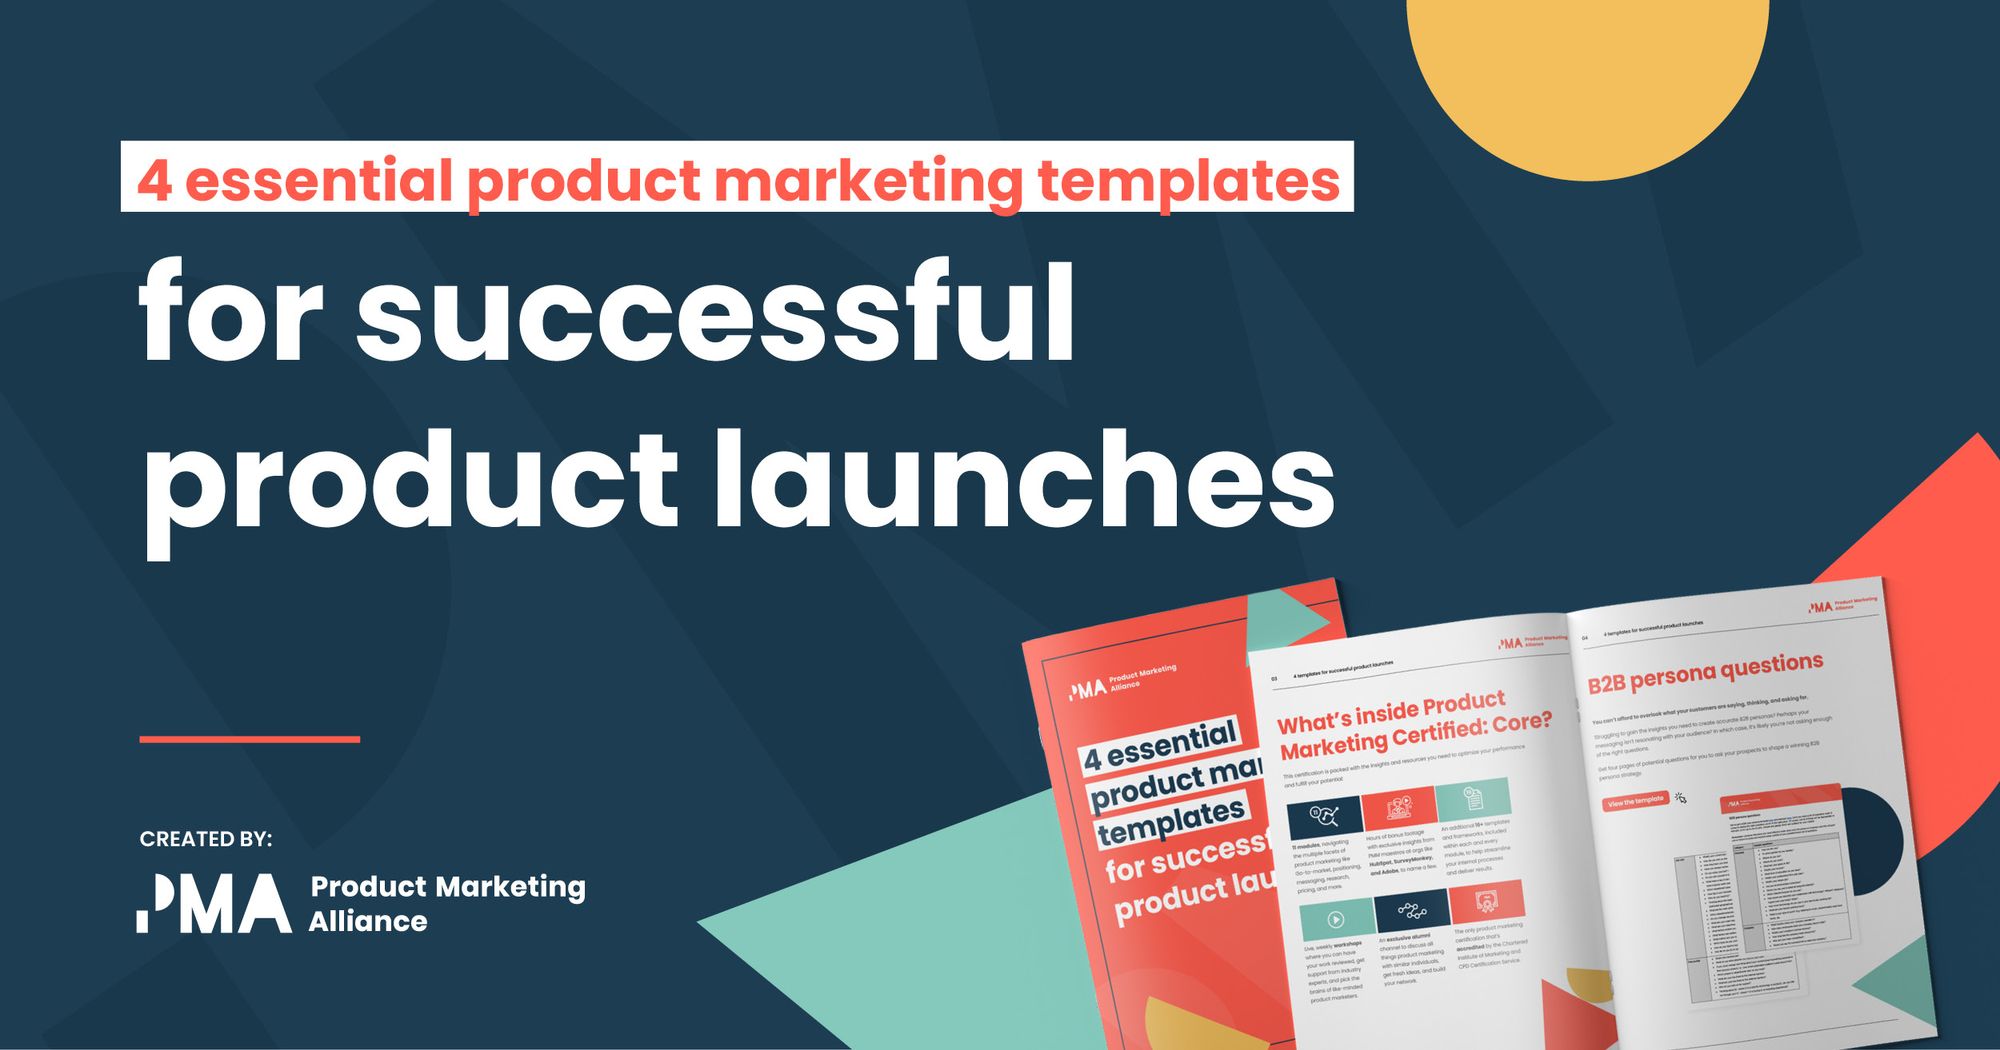 4 essential product marketing templates